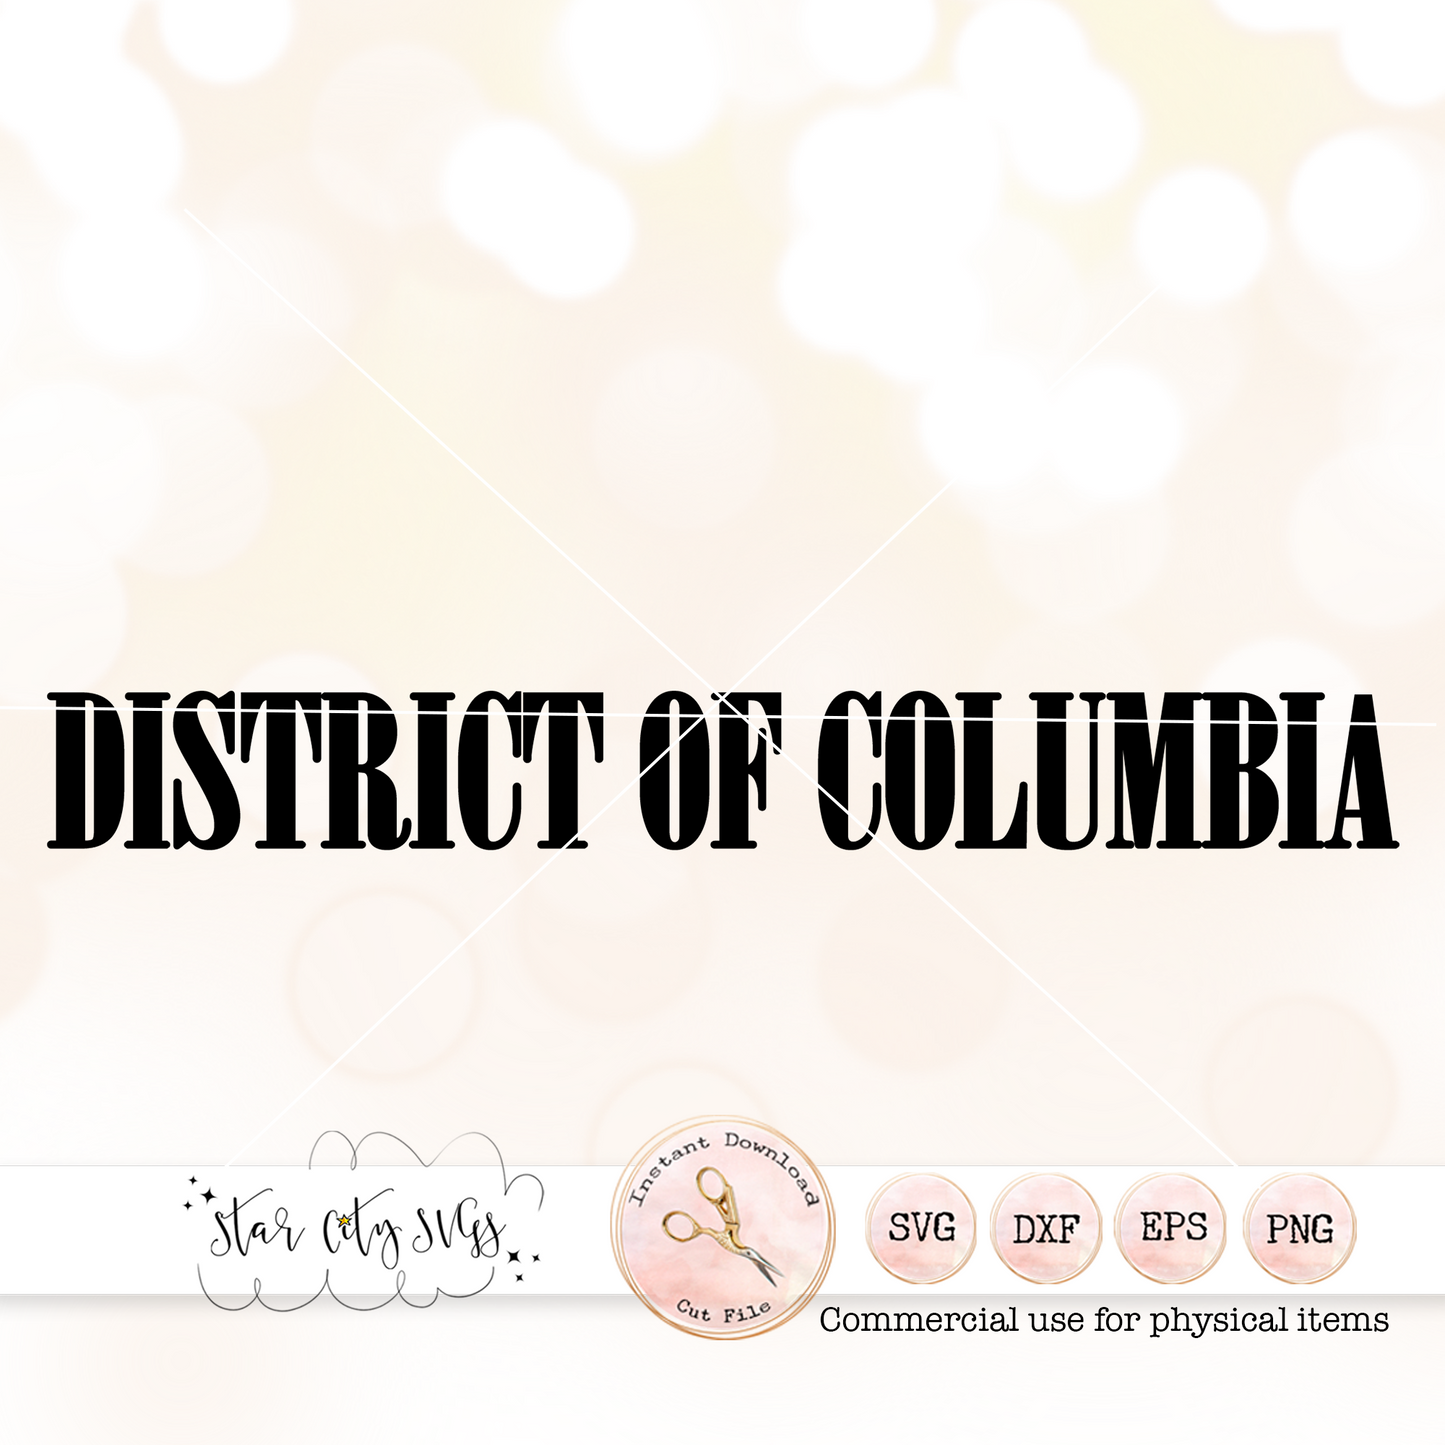 District of Columbia SVG